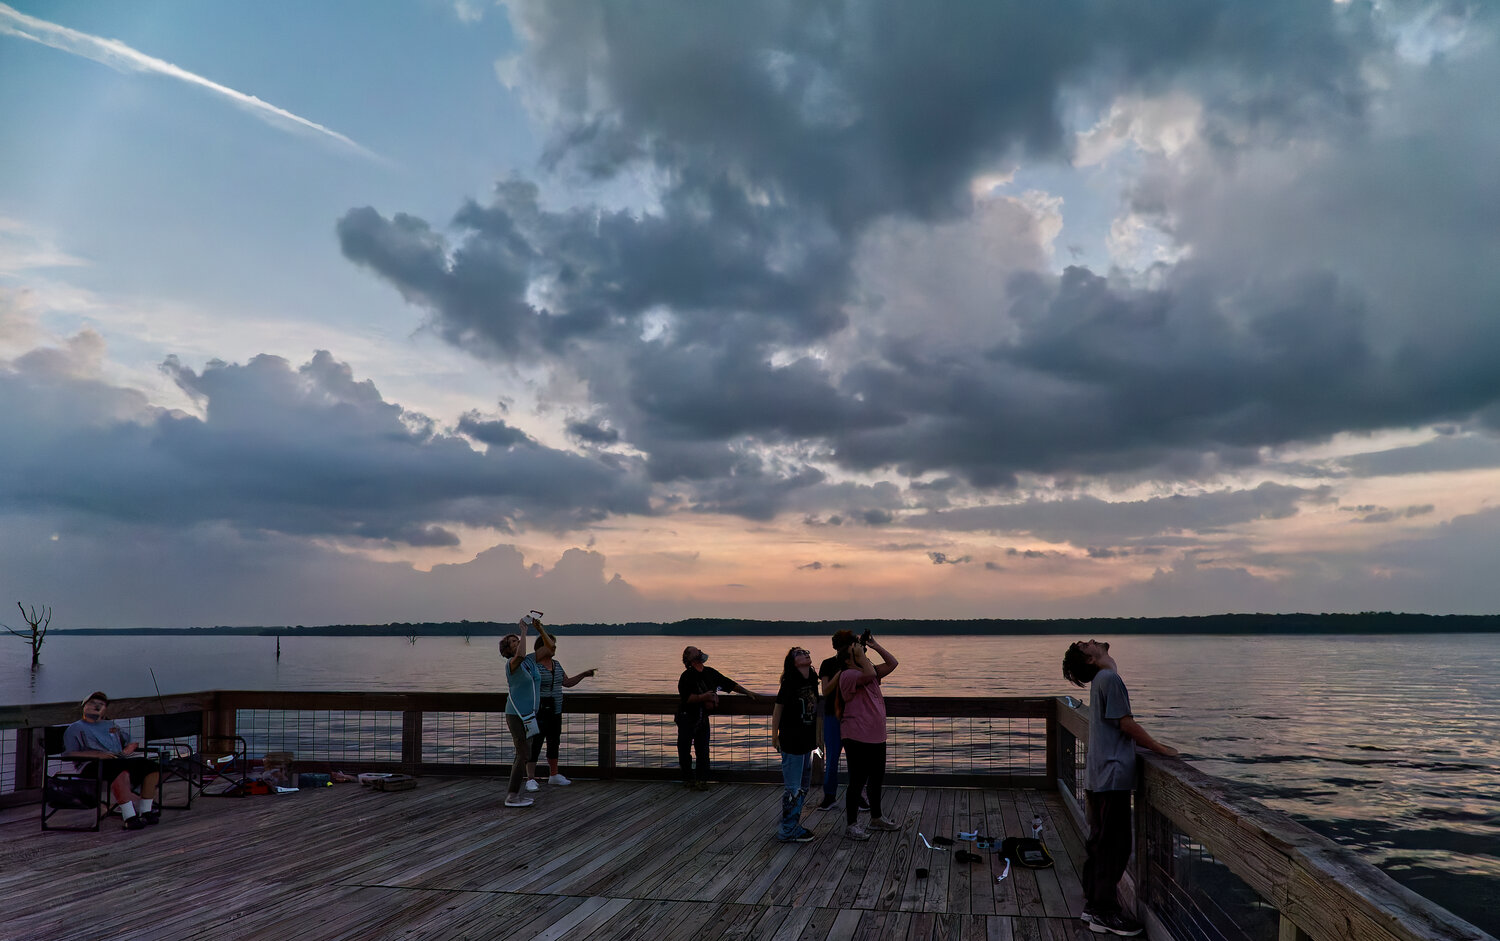 Onlookers at Swearingen Park on Lake Fork observe the total solar eclipse, as the horizon appears as though the sun were setting in all directions – here, north – despite being midday. [view more eclipse photos]